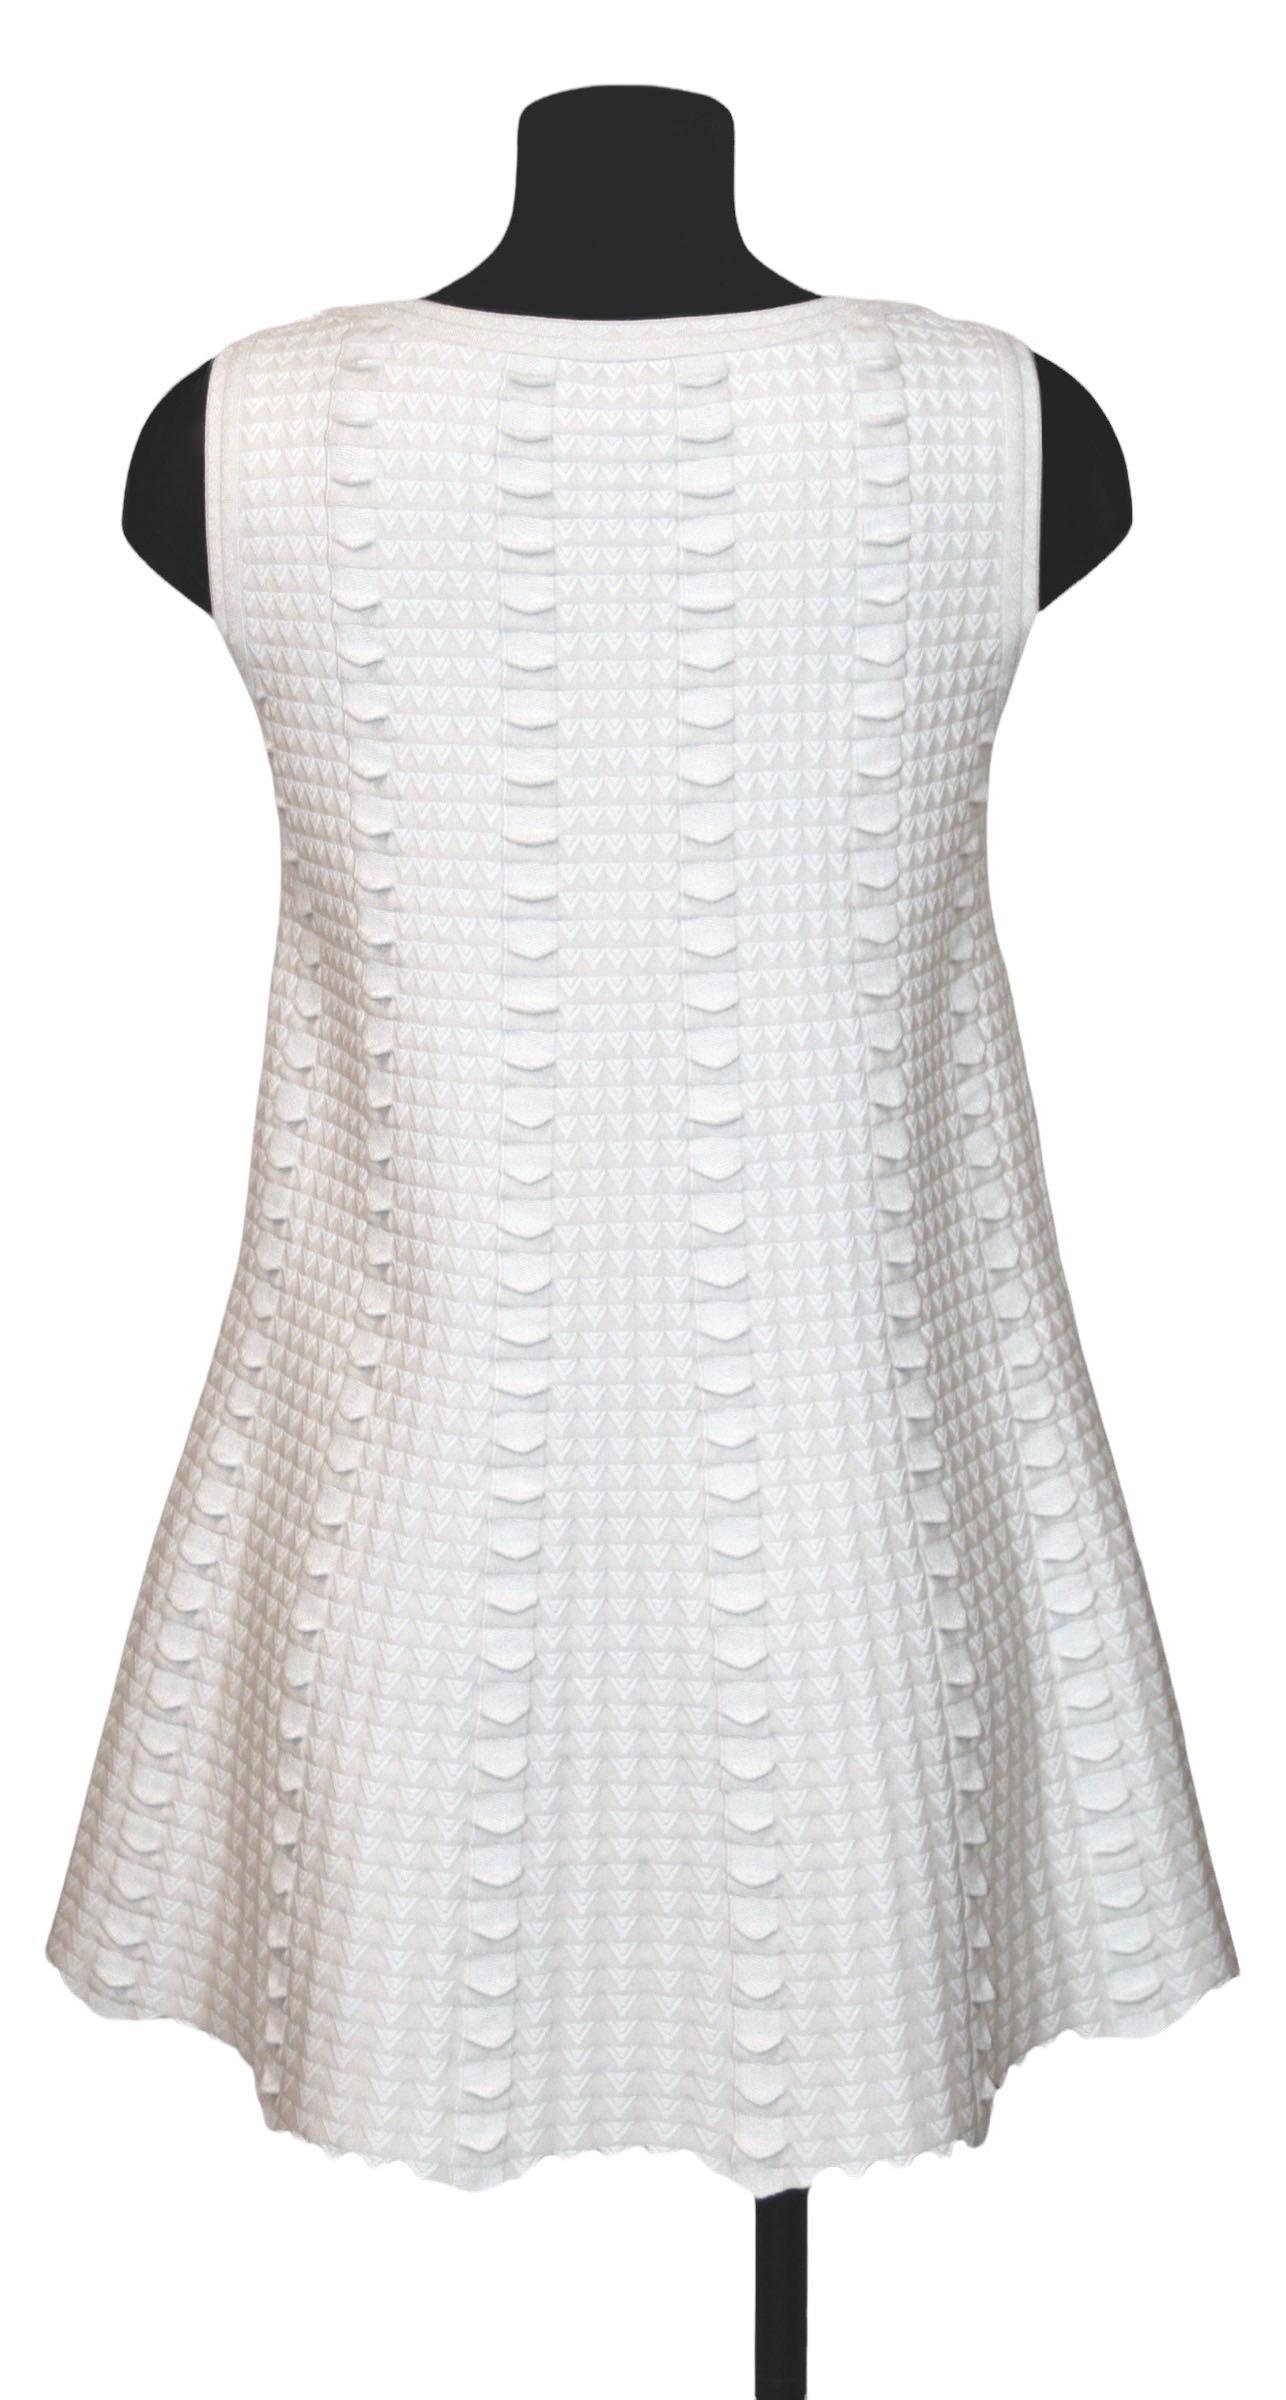 Charming mini dress from the house of Alaïa.
Crafted in natural color tones wool mix, it has an A-line and can be worn as a dress or a tunique.

Material: 43% wool, 25% viscose, 15% nylon, 15% polyester, 4% elastane
Color: Off-white and beige
Size: